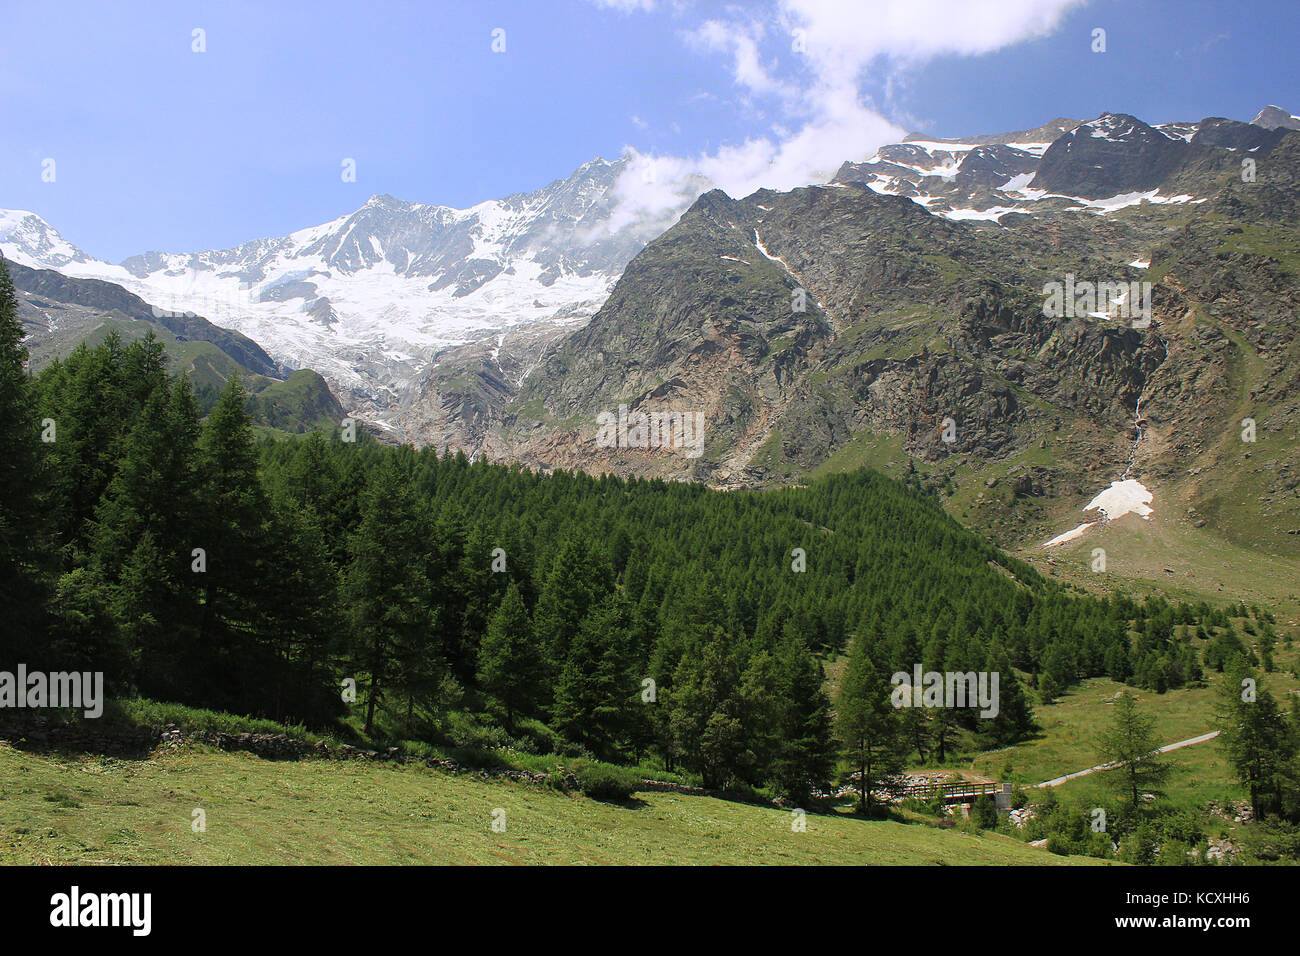 Dom and the surrounding mountains of Saas Fee and the Alpine meadows in Valais, Switzerland. Stock Photo